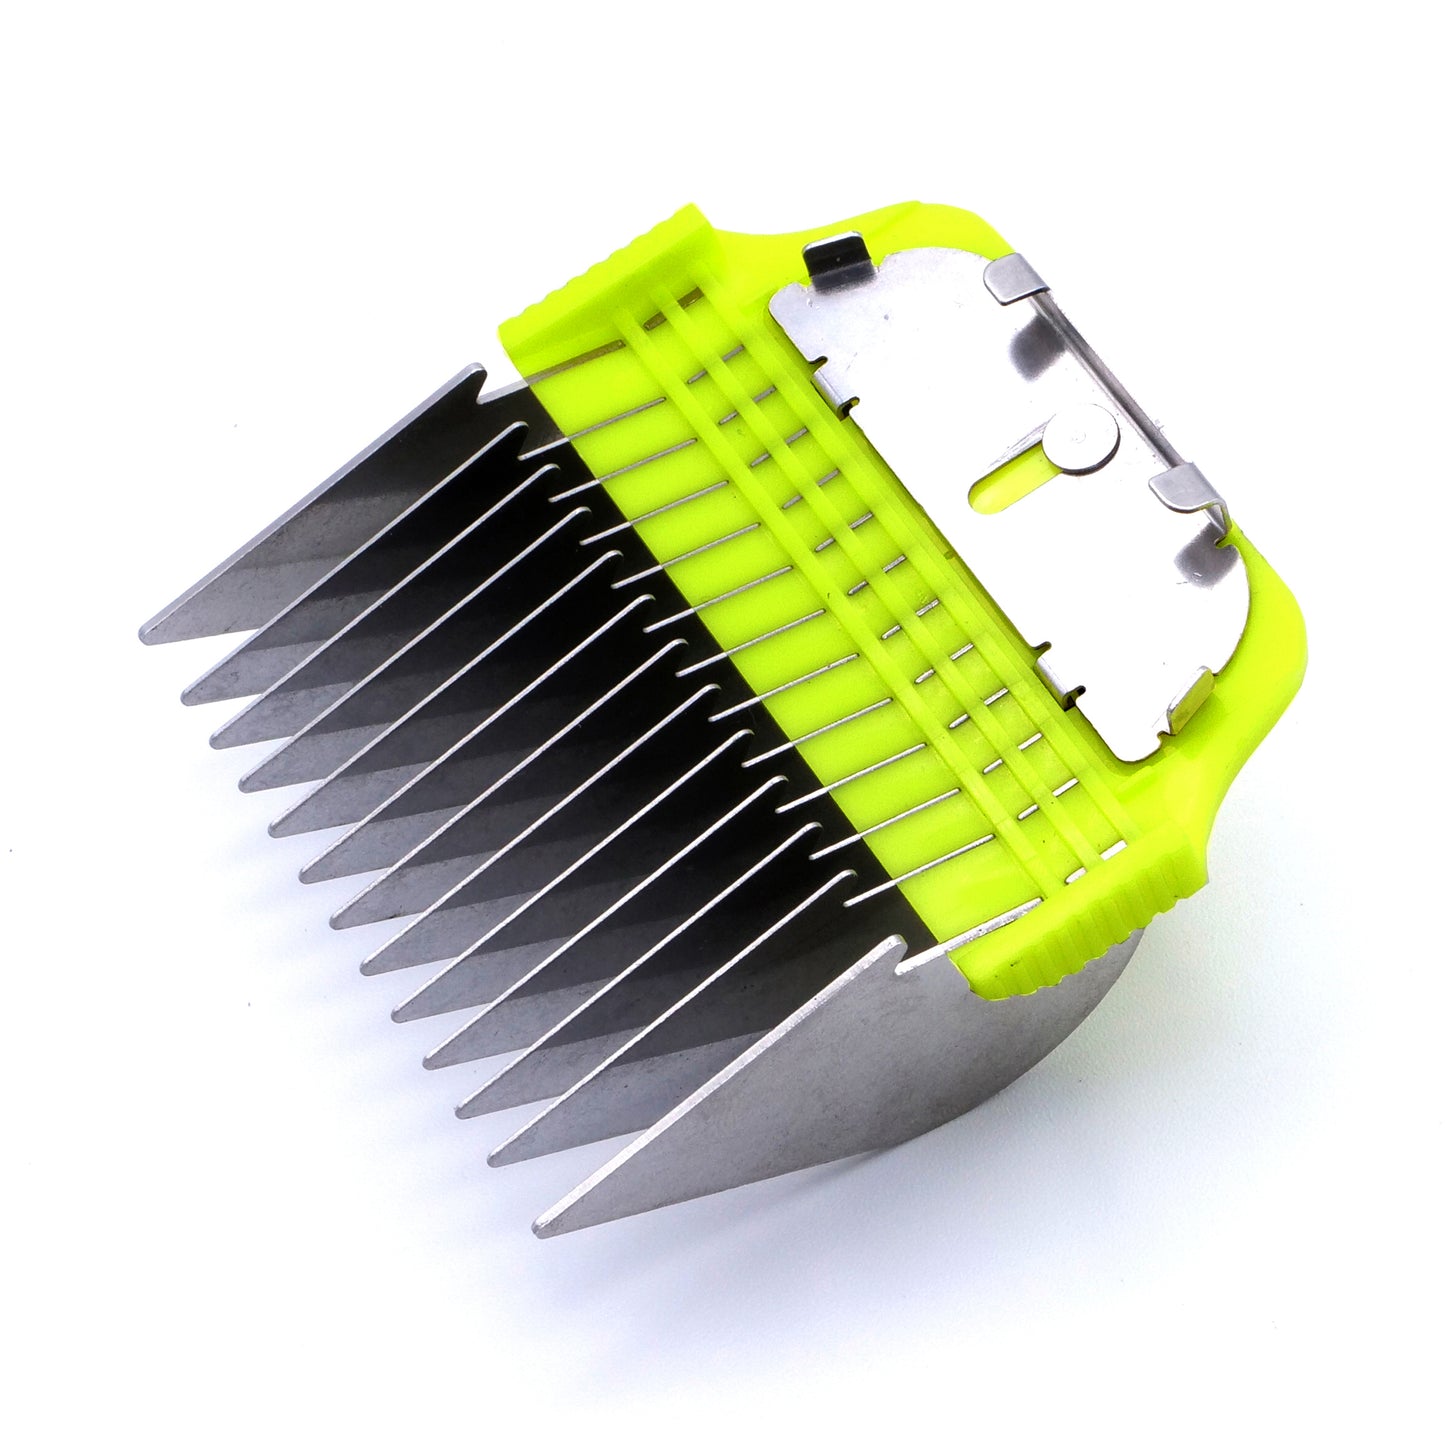 The Artero Wide Snap-On Metal Comb 22mm - 7/8" is designed for use with the Artero A5 wide clipper blade and offers a smooth, even finish. This comb is also compatible with Andis, Moser, Heiniger, Oster, and Aesculap Fav5 and Fav5 CL blades. Features: Cutting height: 7/8" Metal Construction Fits A5 Clippers.